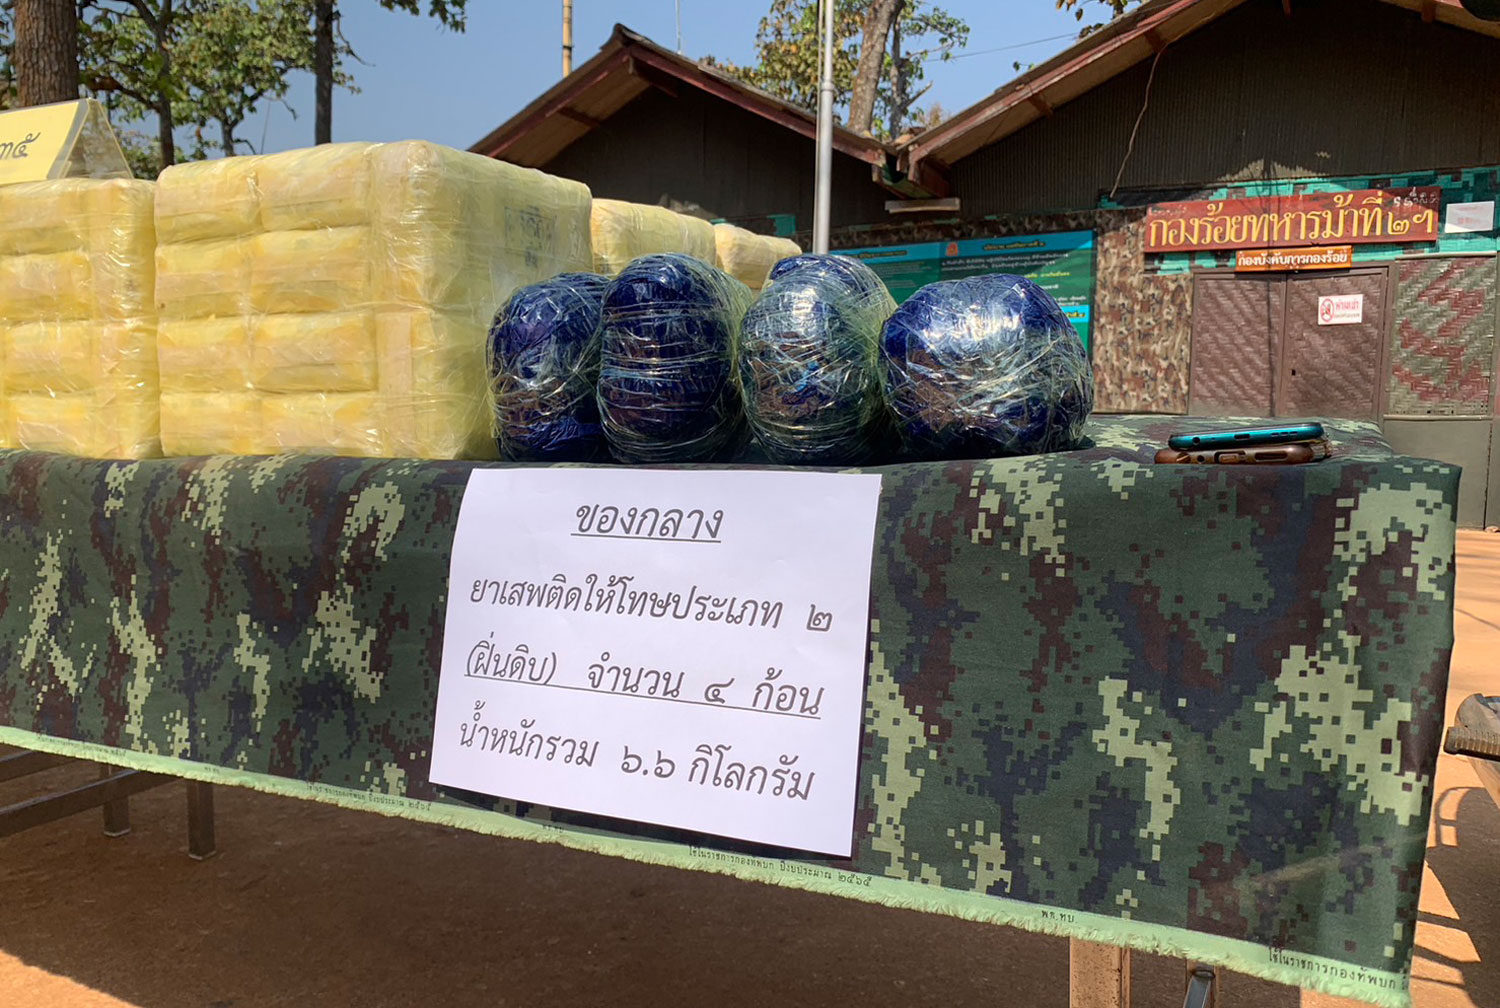 Amy Seizes Over 6Kg of Raw Opium in Chiang Mai Province